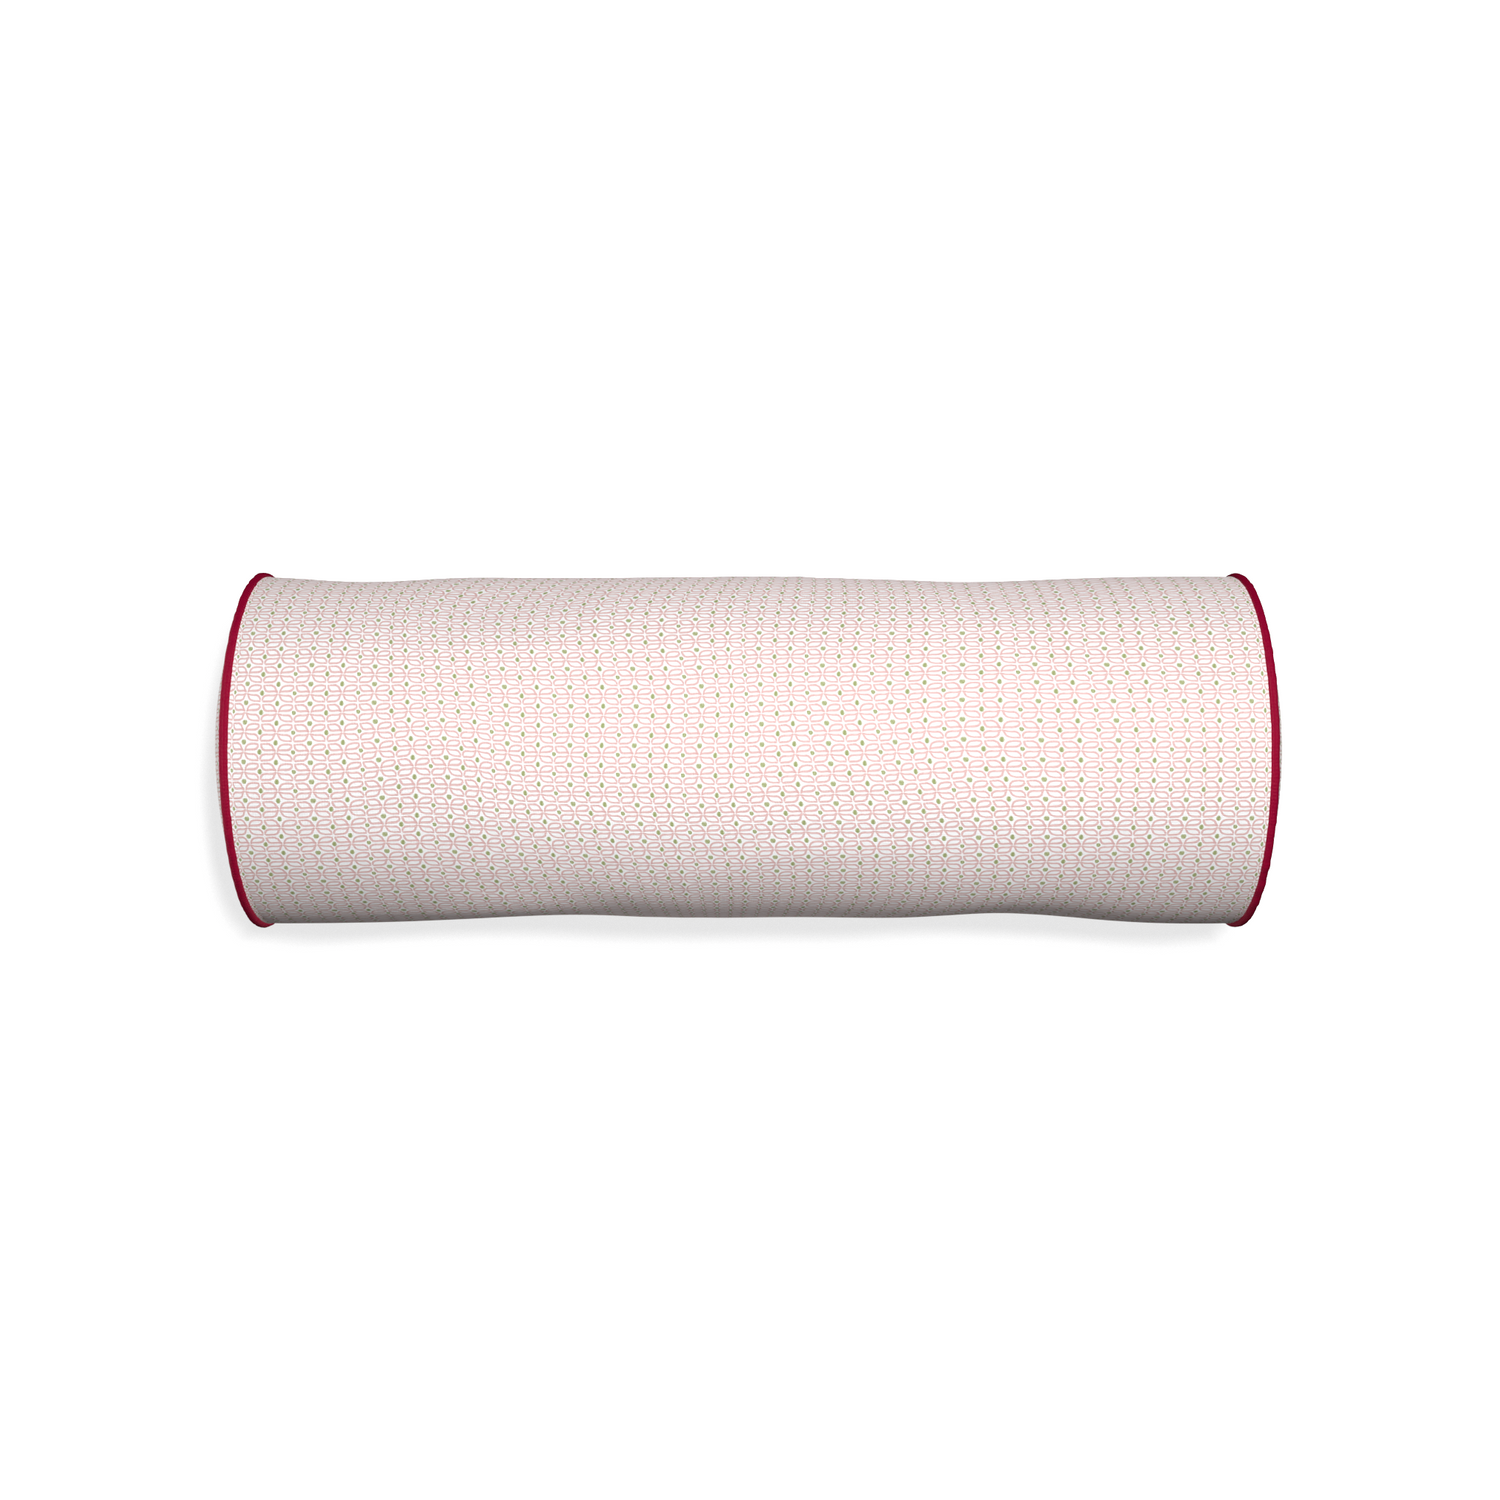 Bolster loomi pink custom pillow with raspberry piping on white background